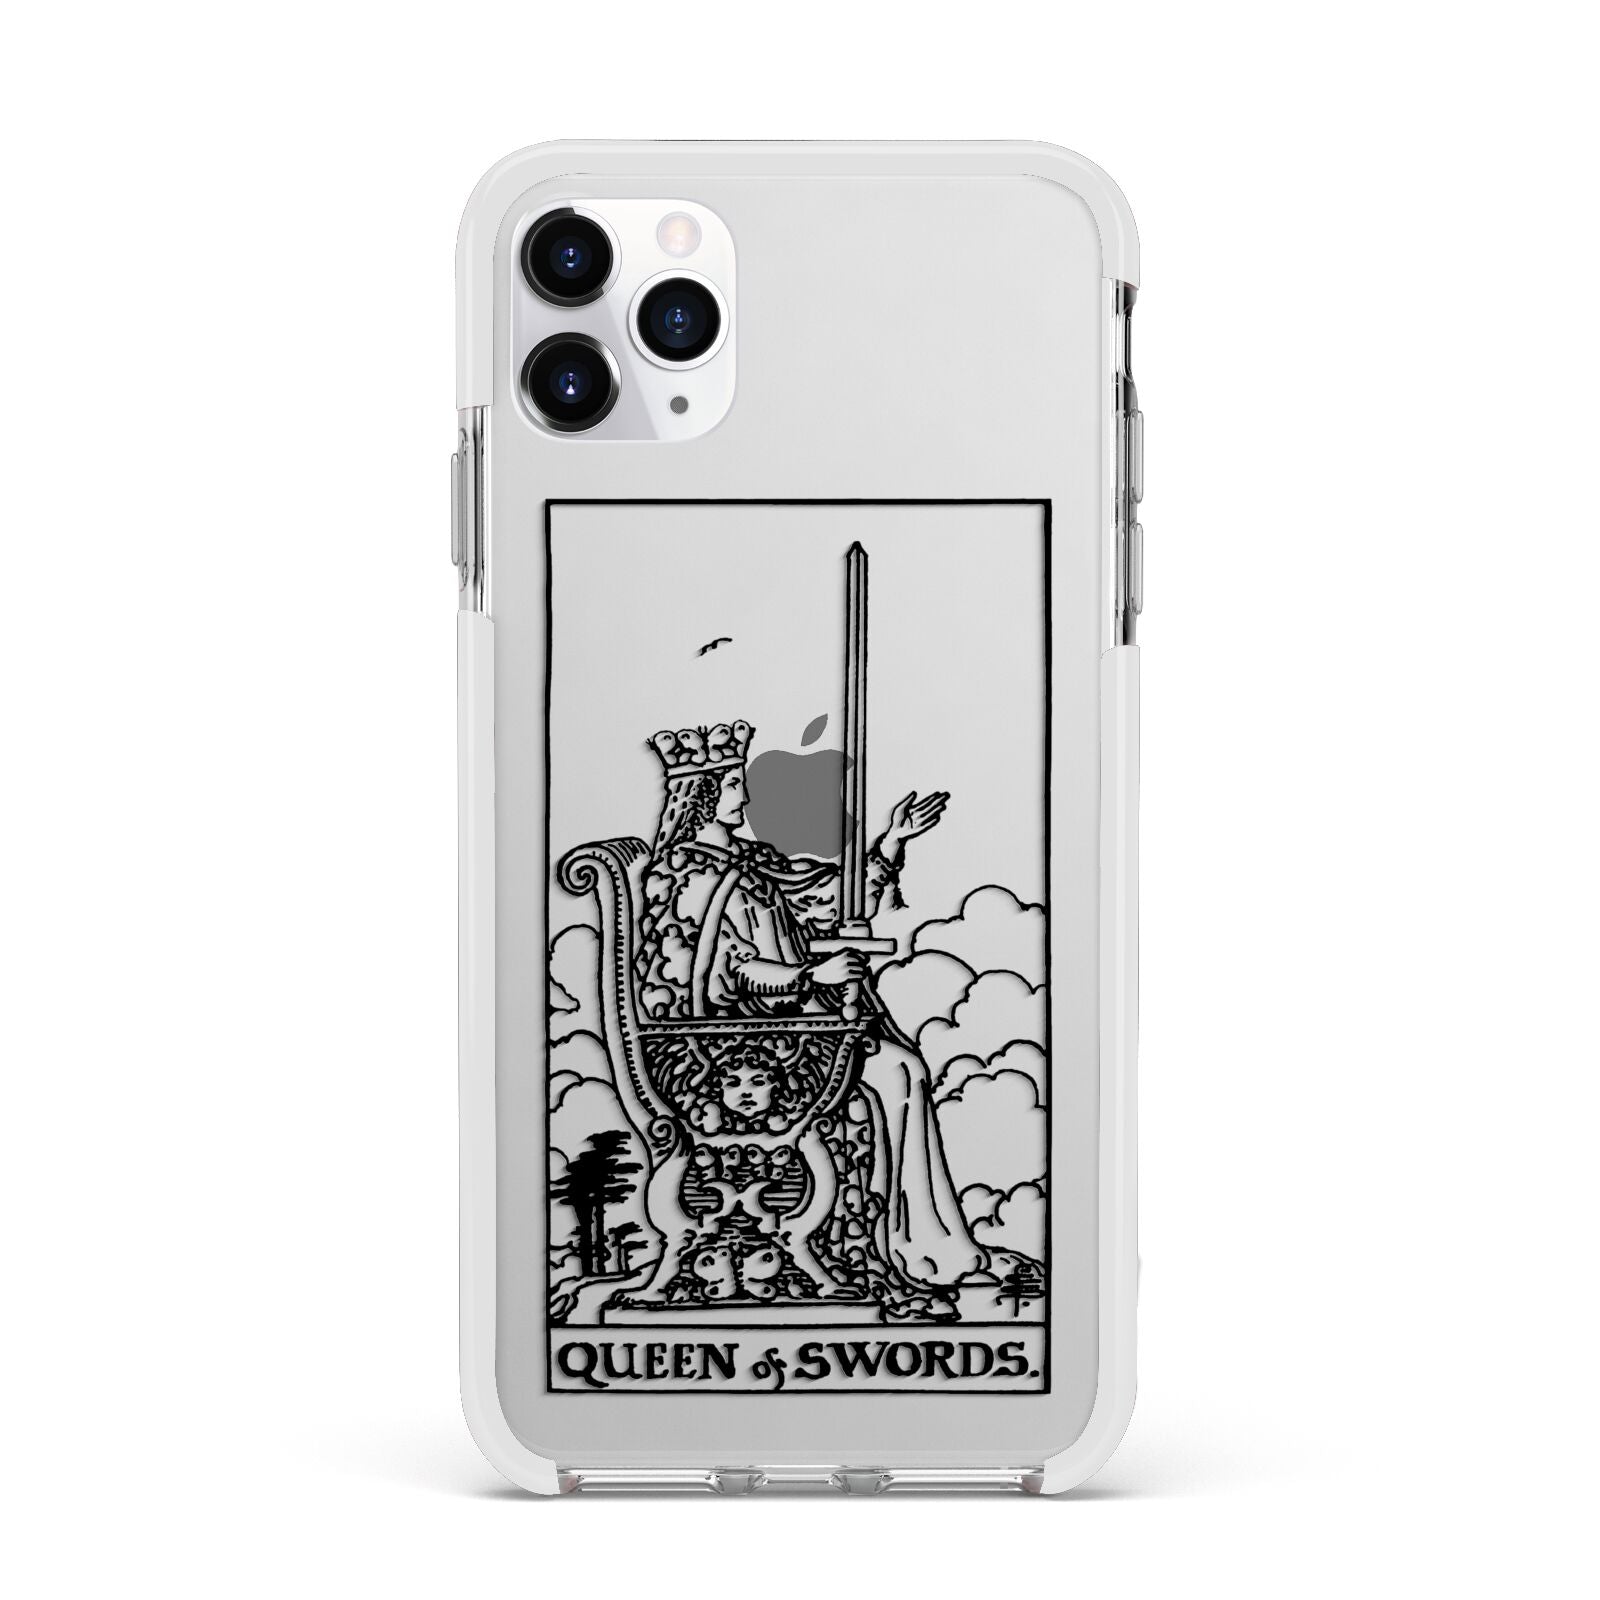 Queen of Swords Monochrome Apple iPhone 11 Pro Max in Silver with White Impact Case